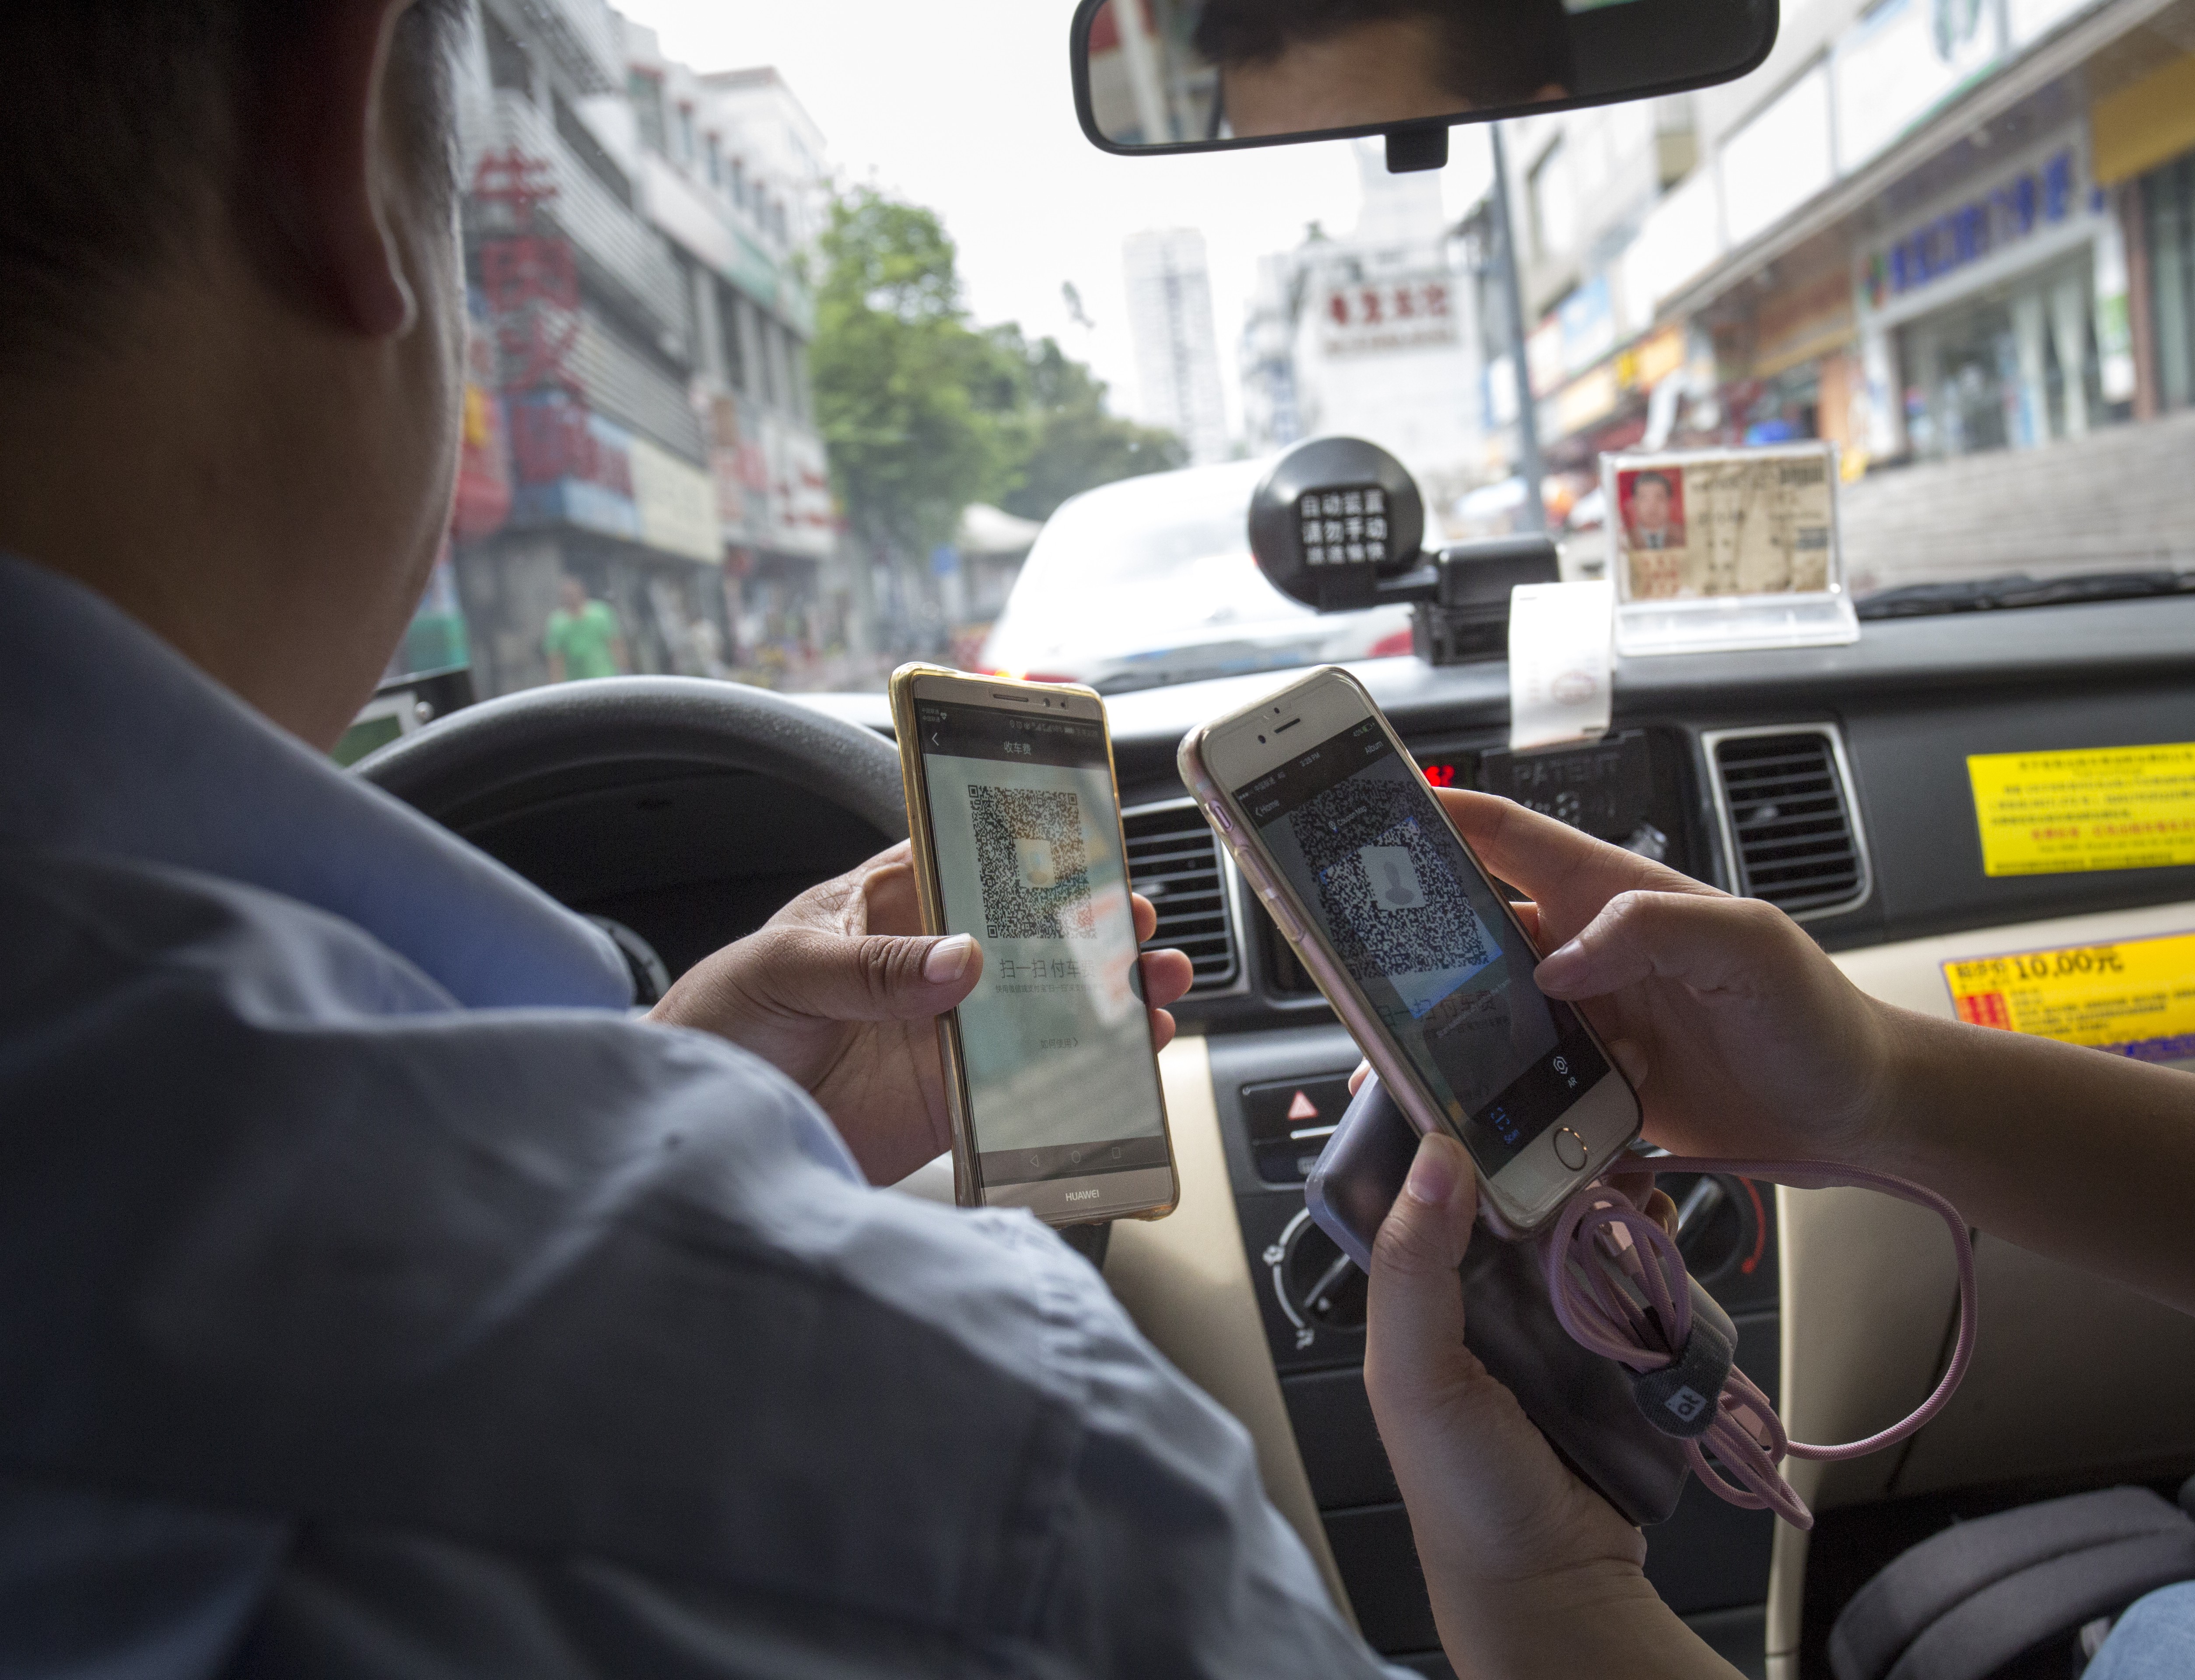 A passenger pays for her ride via mobile payment in Shenzhen. Photo: May Tse